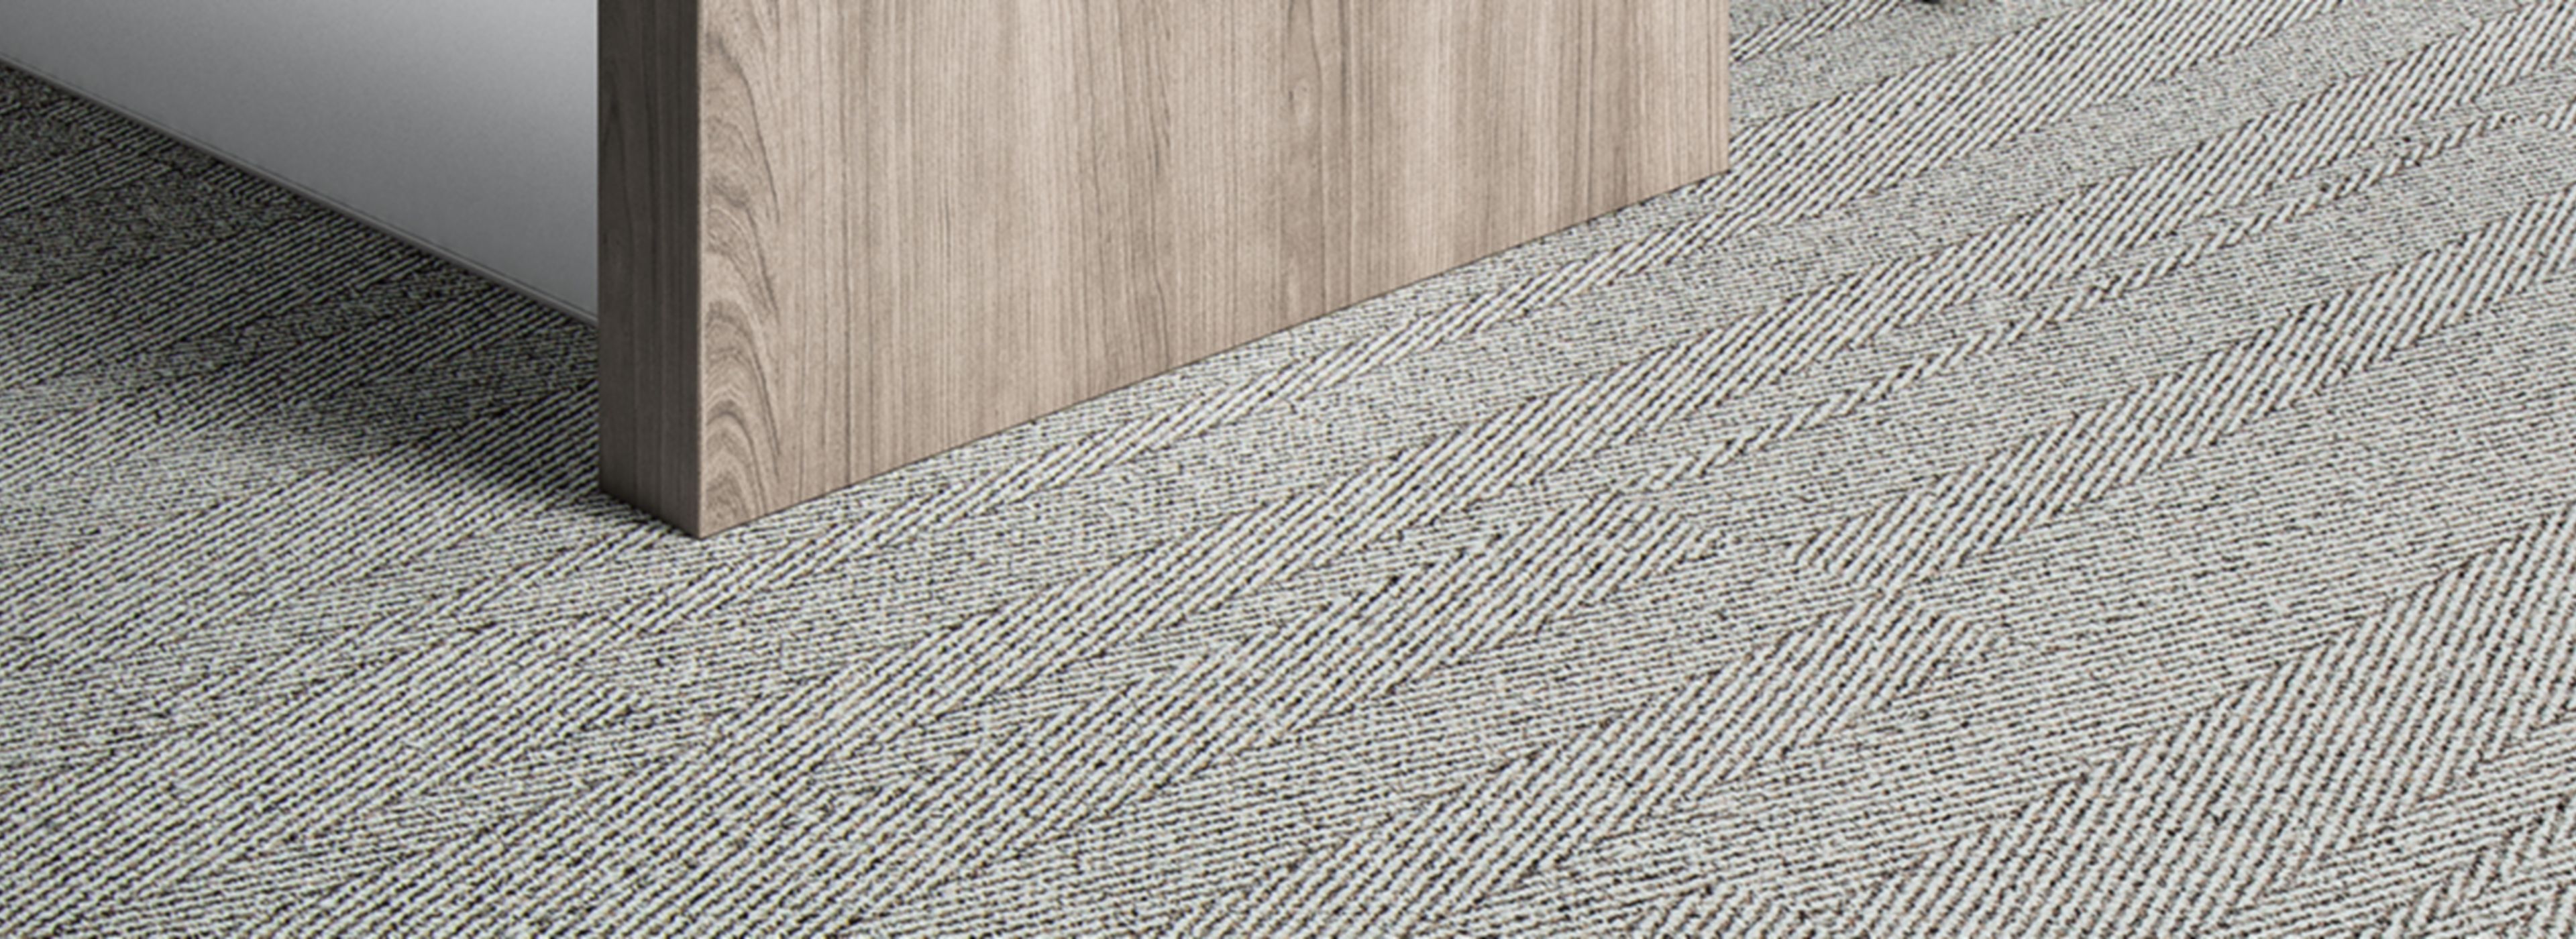 Interface Stitch in Timeplank carpet tile  in office with wood desk and chair imagen número 1